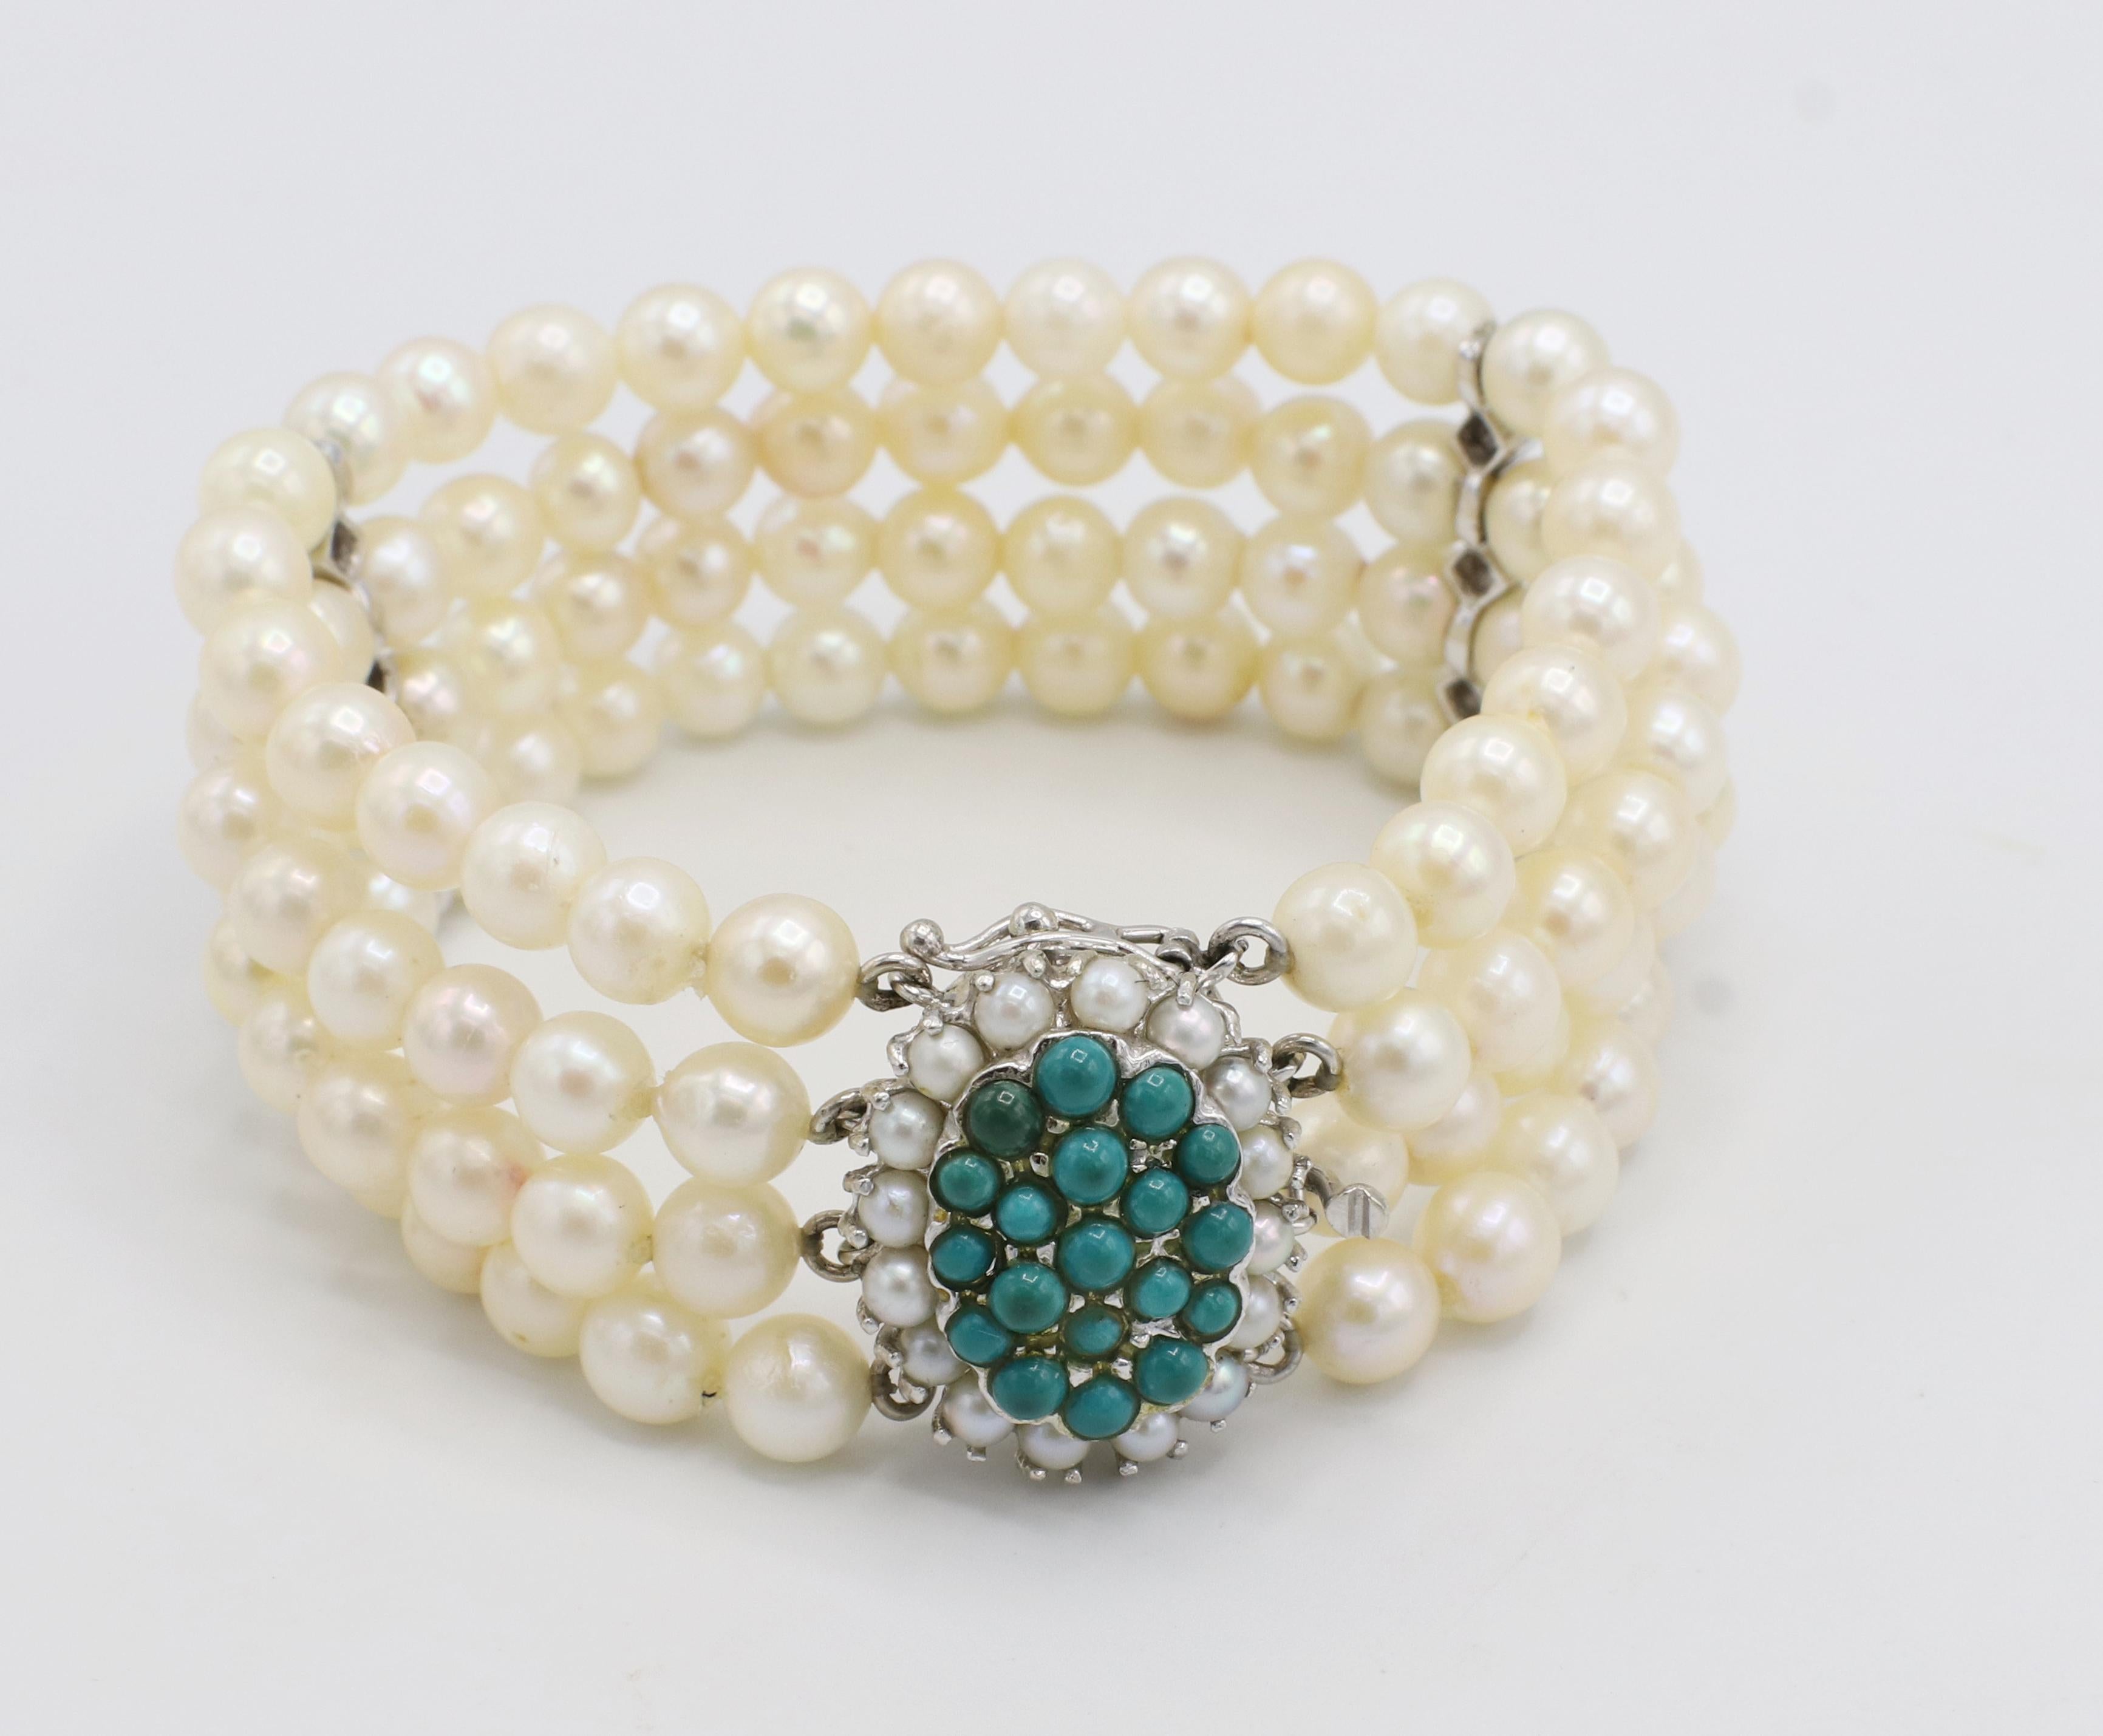 14 Karat White Gold 4-Row Pearl Bracelet With Turquoise Stations & Clasp
Metal: 14k white gold
Weight: 40.76 grams
Pearls: 5.8-6mm white cultured pearls 
Length: 6.5 inches
Width: 1 inch
